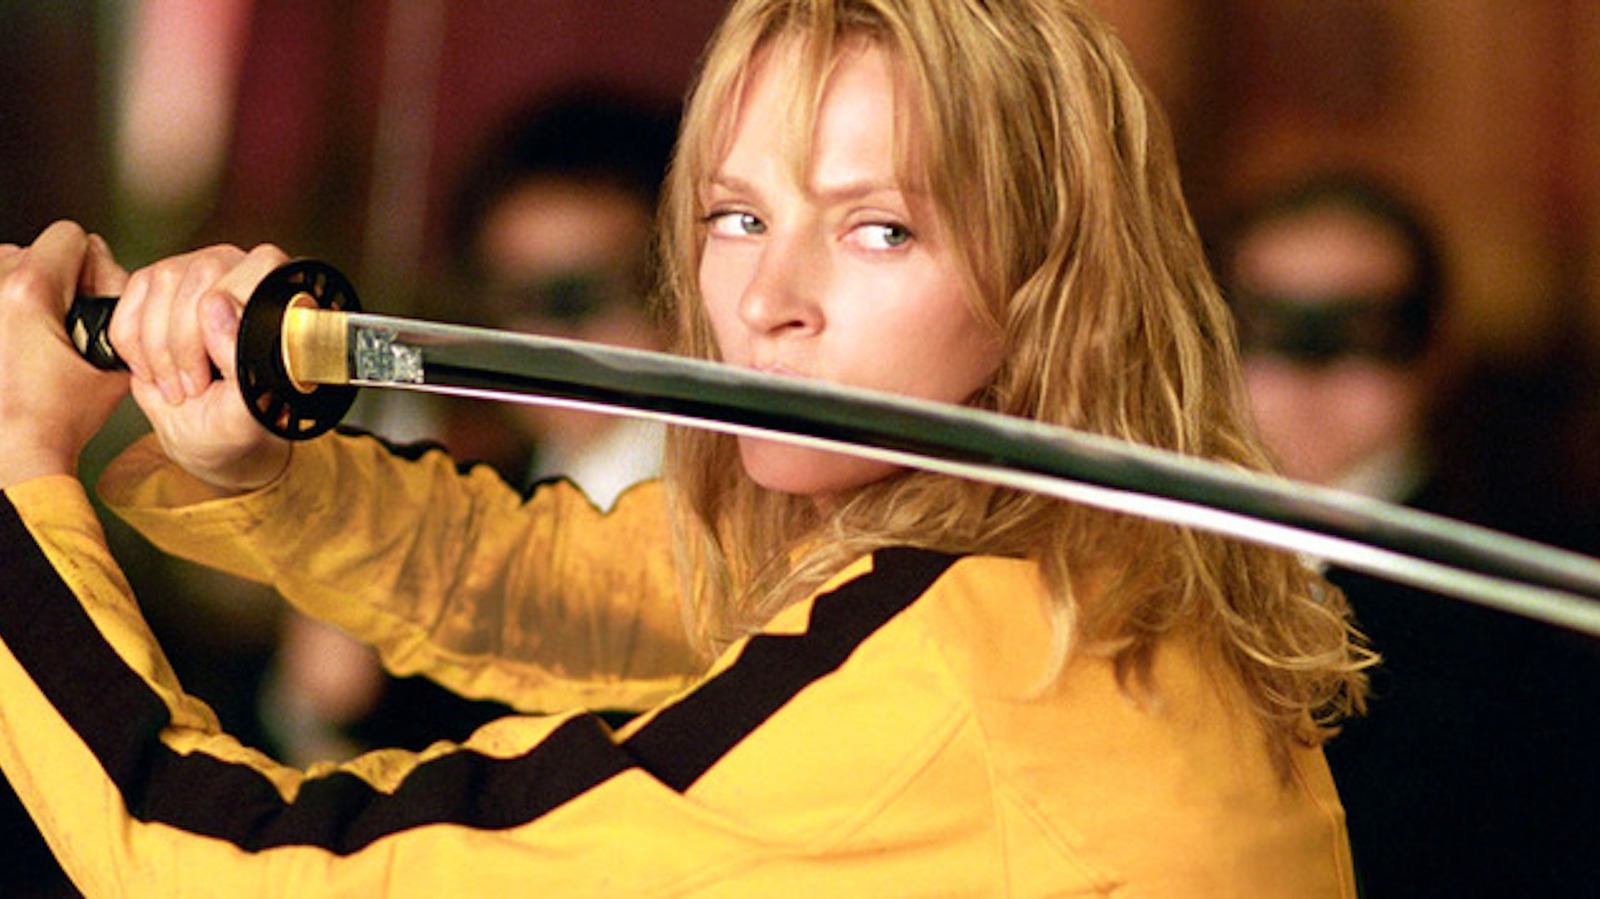 A Night Out With The Pulp Fiction Crew Causes Quentin Tarantino to Pitch Kill Bill